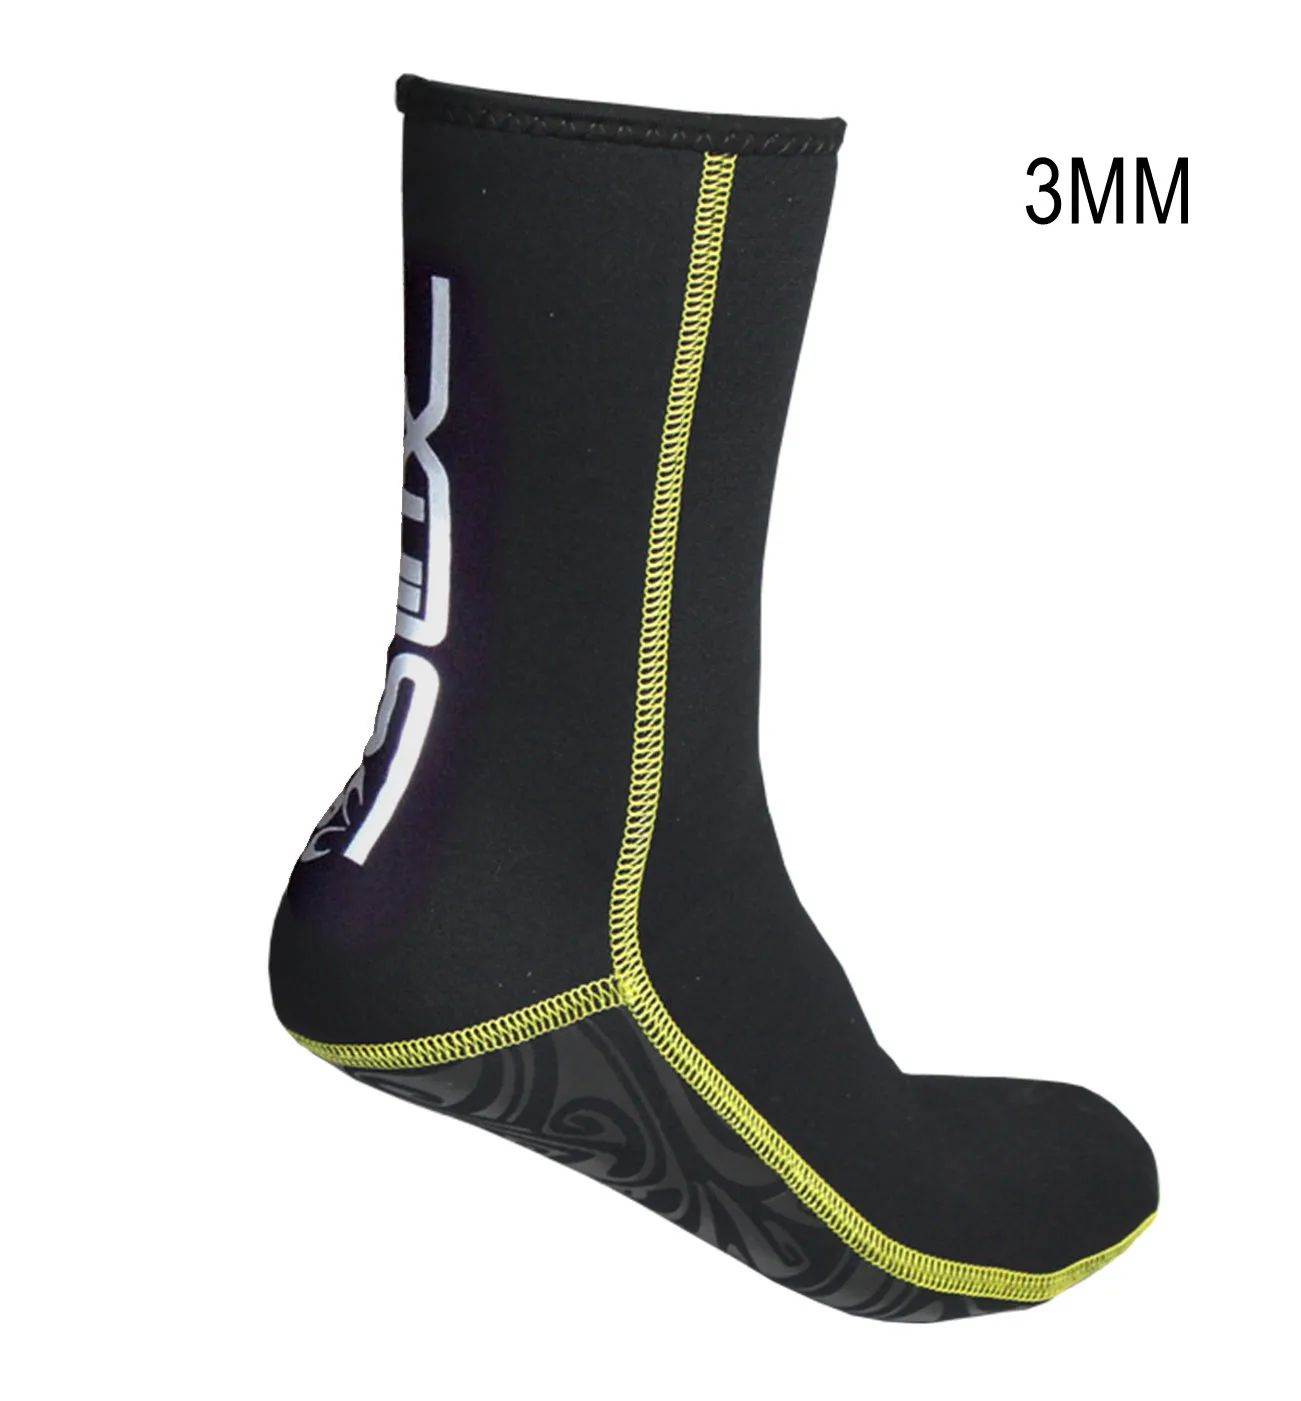 3MM Neoprene Non-slip Adult Keep Warm Diving Socks Beach Wetsuit Shoes Scuba Surfing Spearfishing Snorkeling Bathing Swim Socks 5mm neoprene scuba boots anti slip adult diving boots for snorkeling scuba diving canyoning